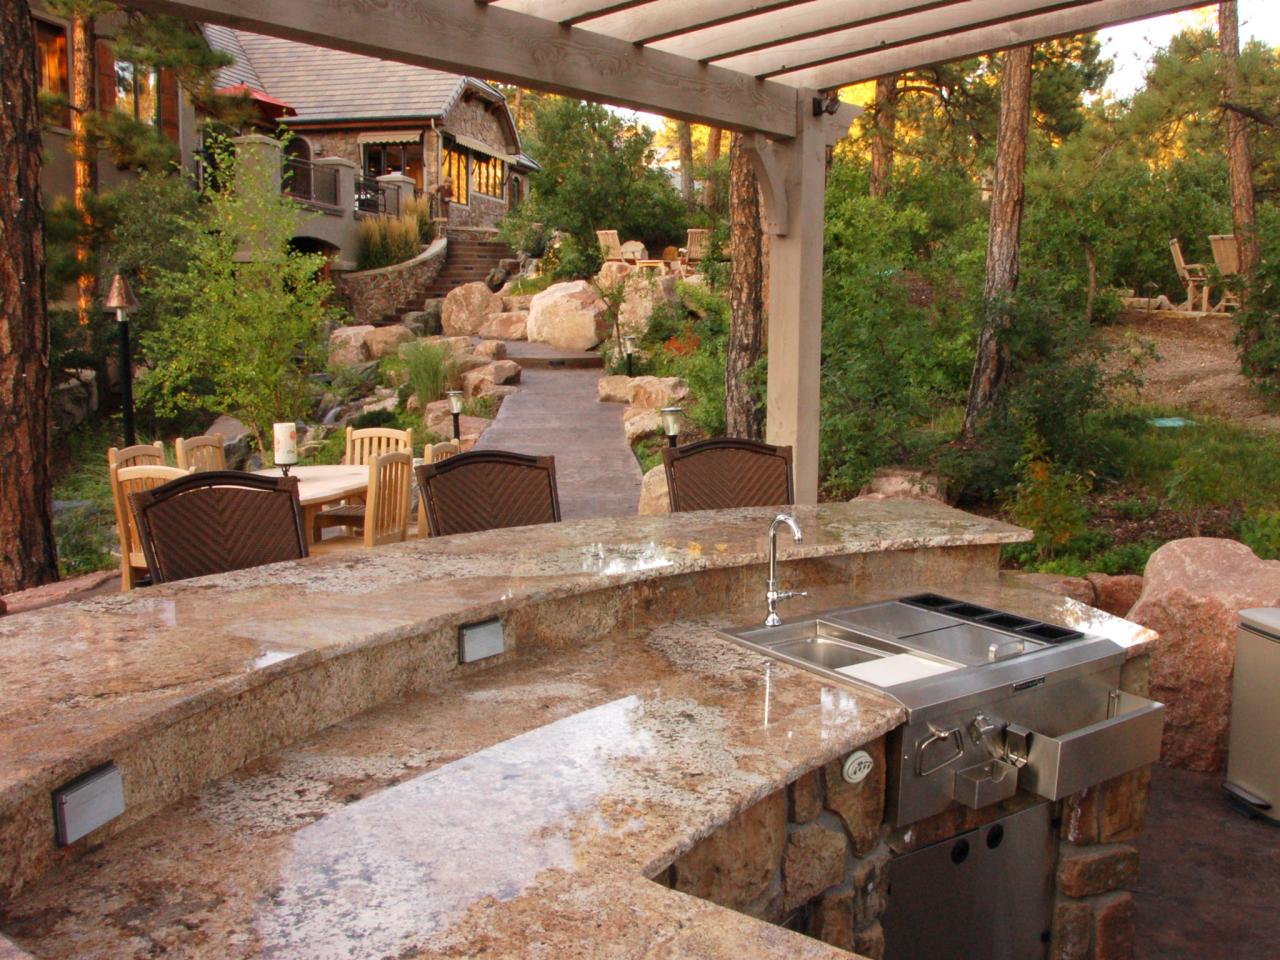 outdoor kitchen pictures photo - 2